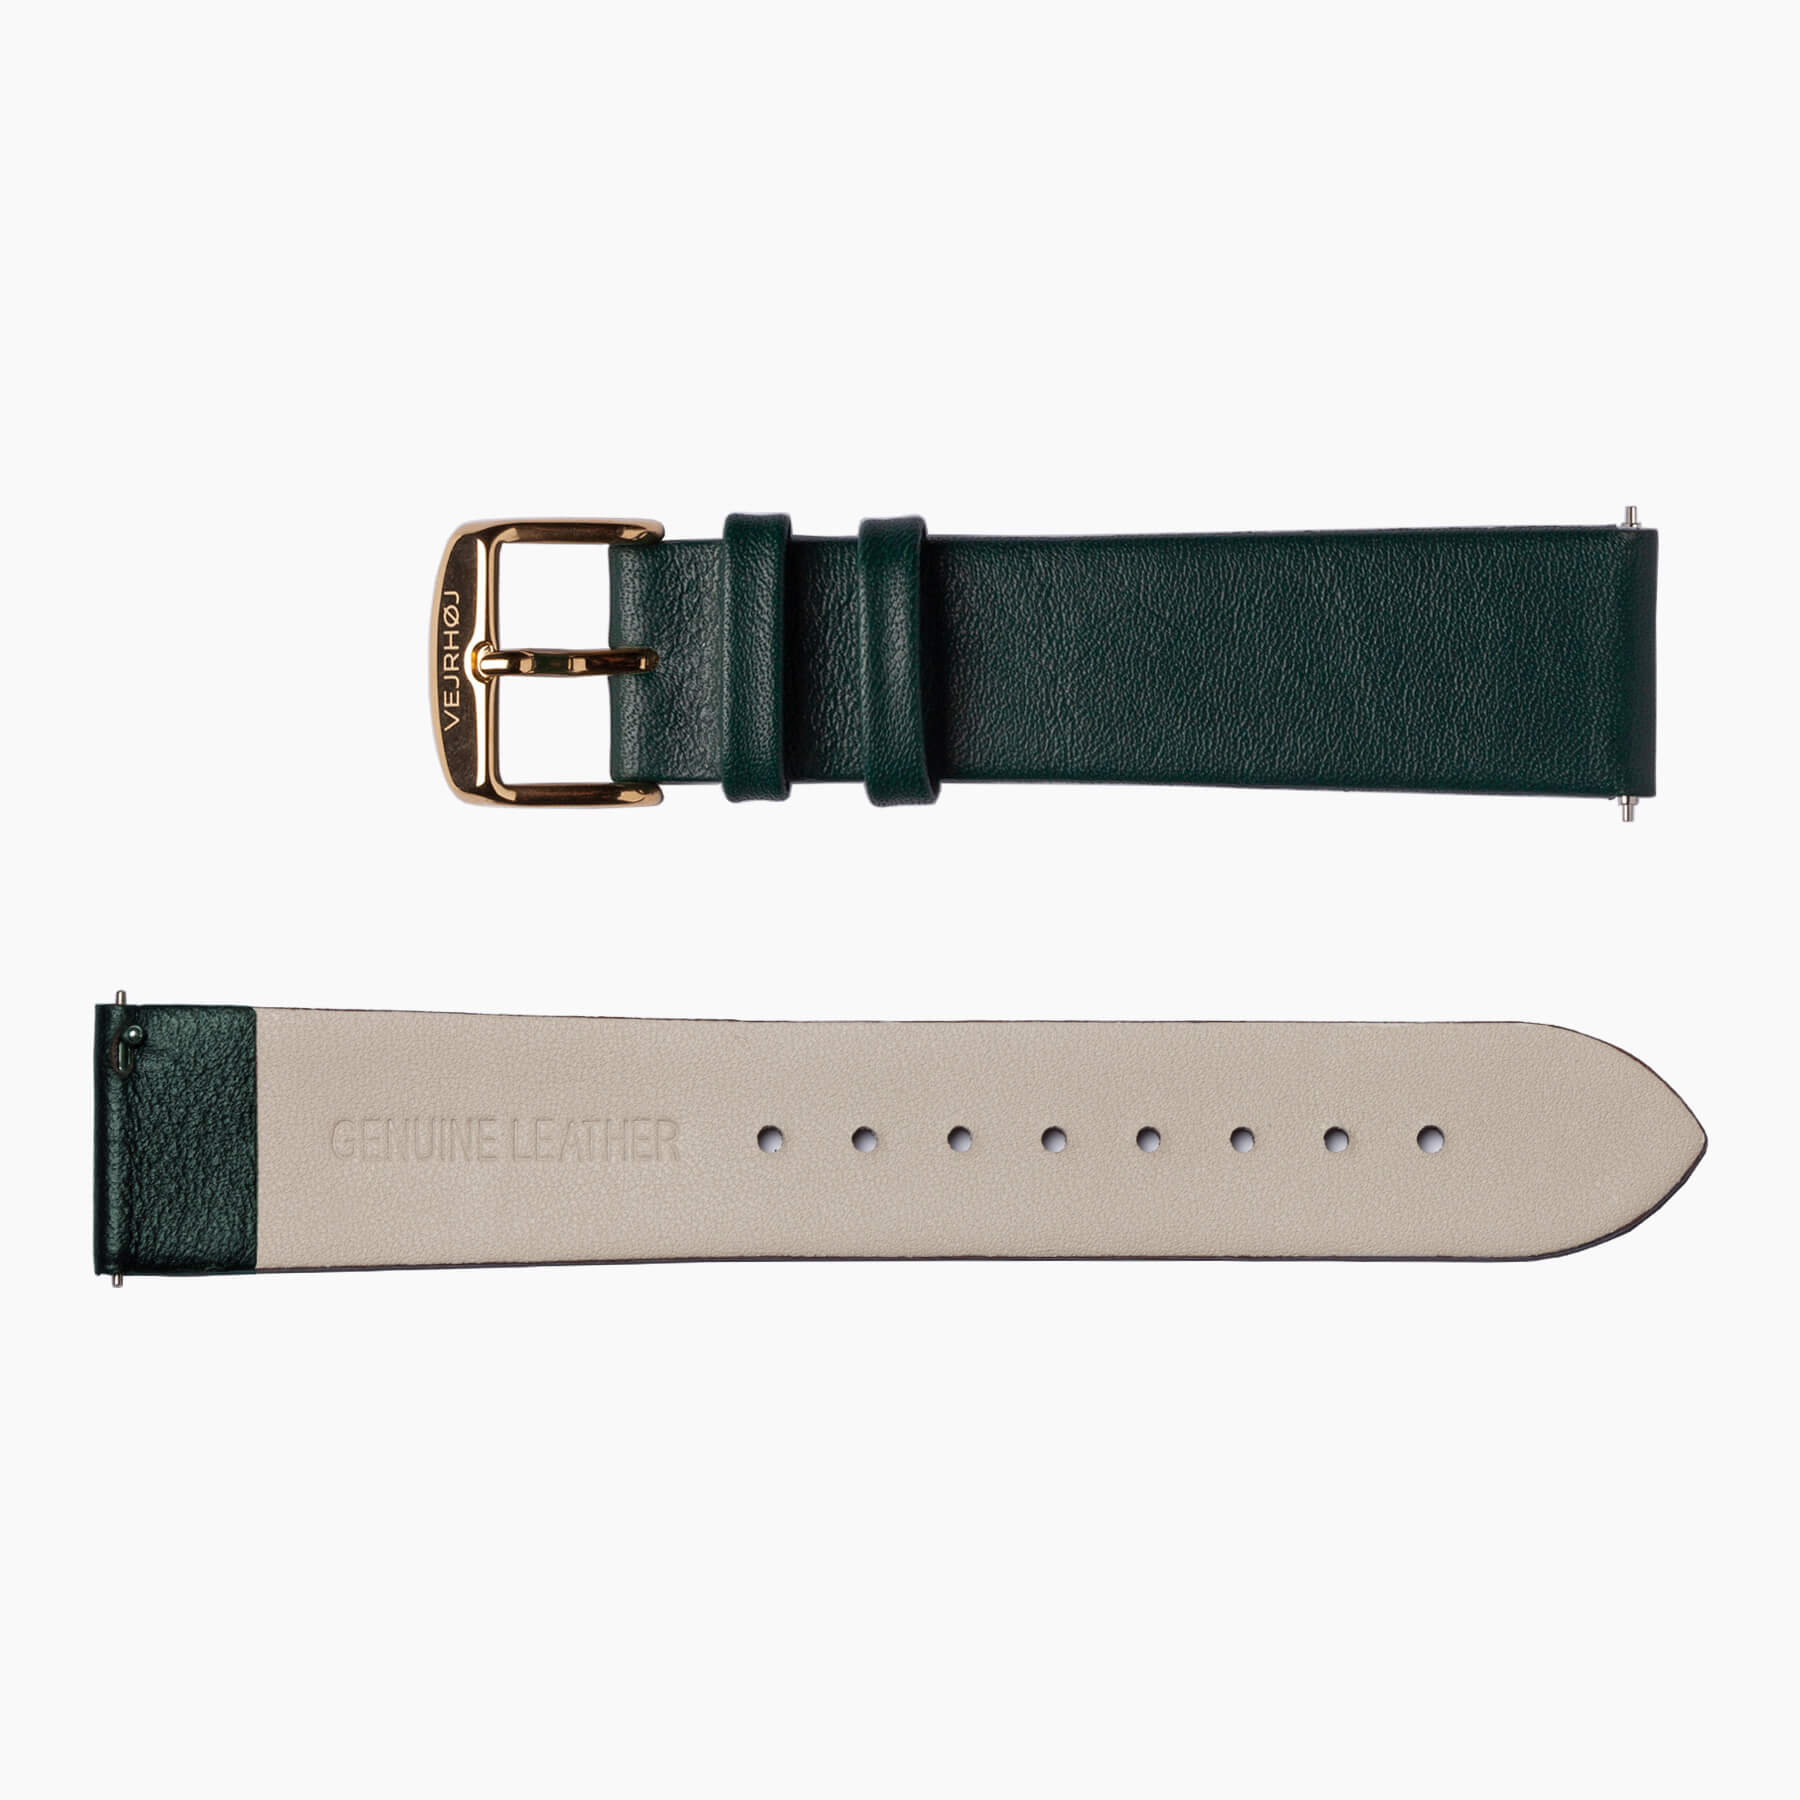 Green strap with golden buckle